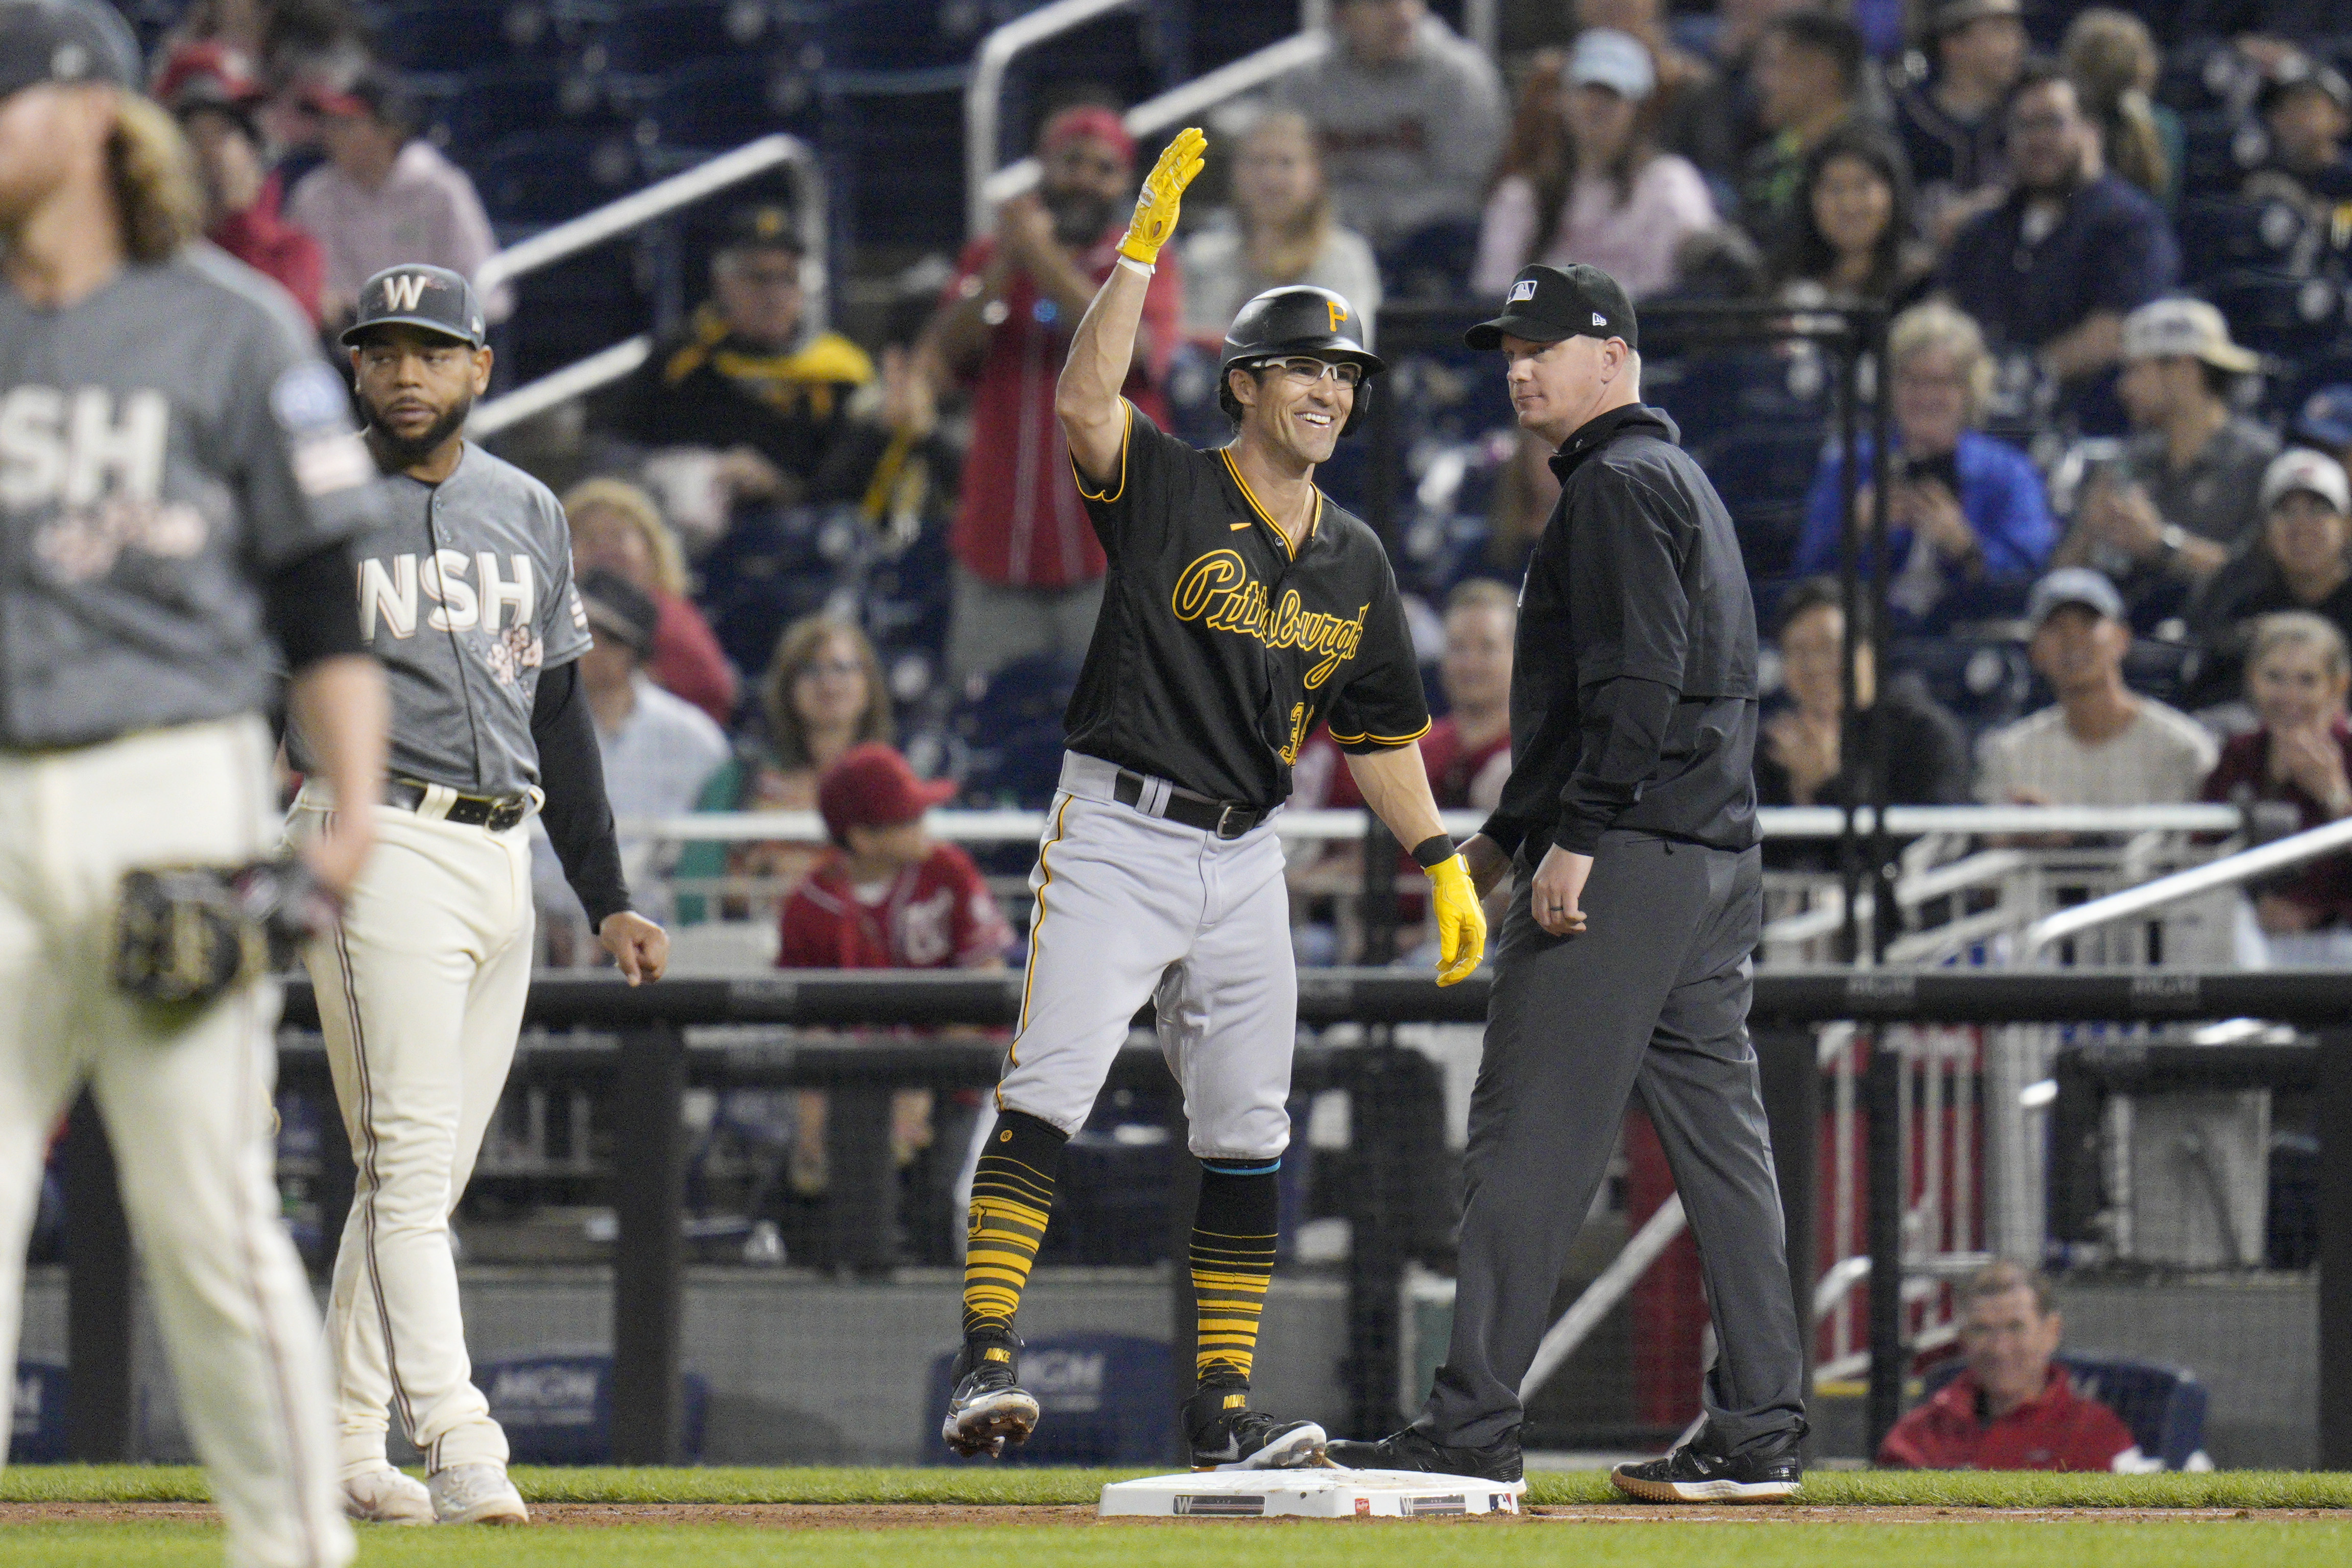 Drew Maggi gets first major league hits, Pirates sweep Nationals